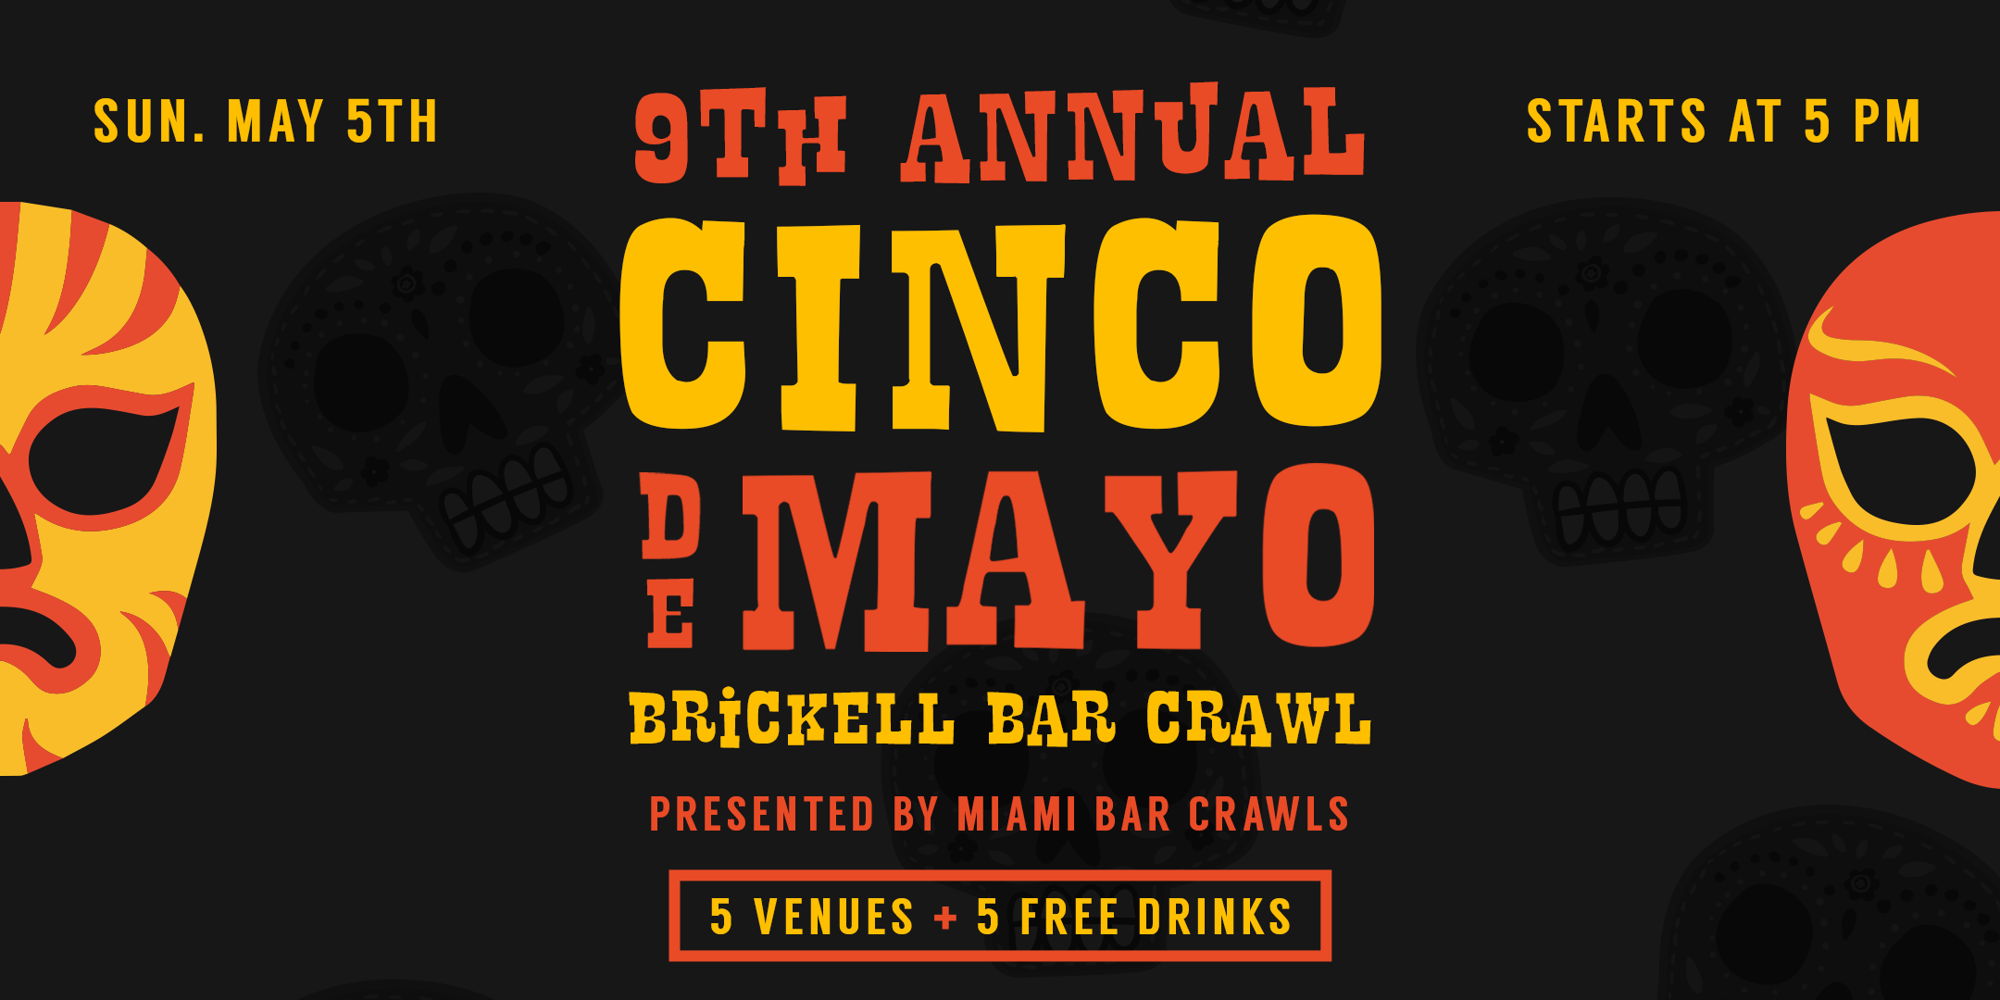 9th Annual Cinco de Mayo Bar Crawl in Brickell - Day 2 promotional image